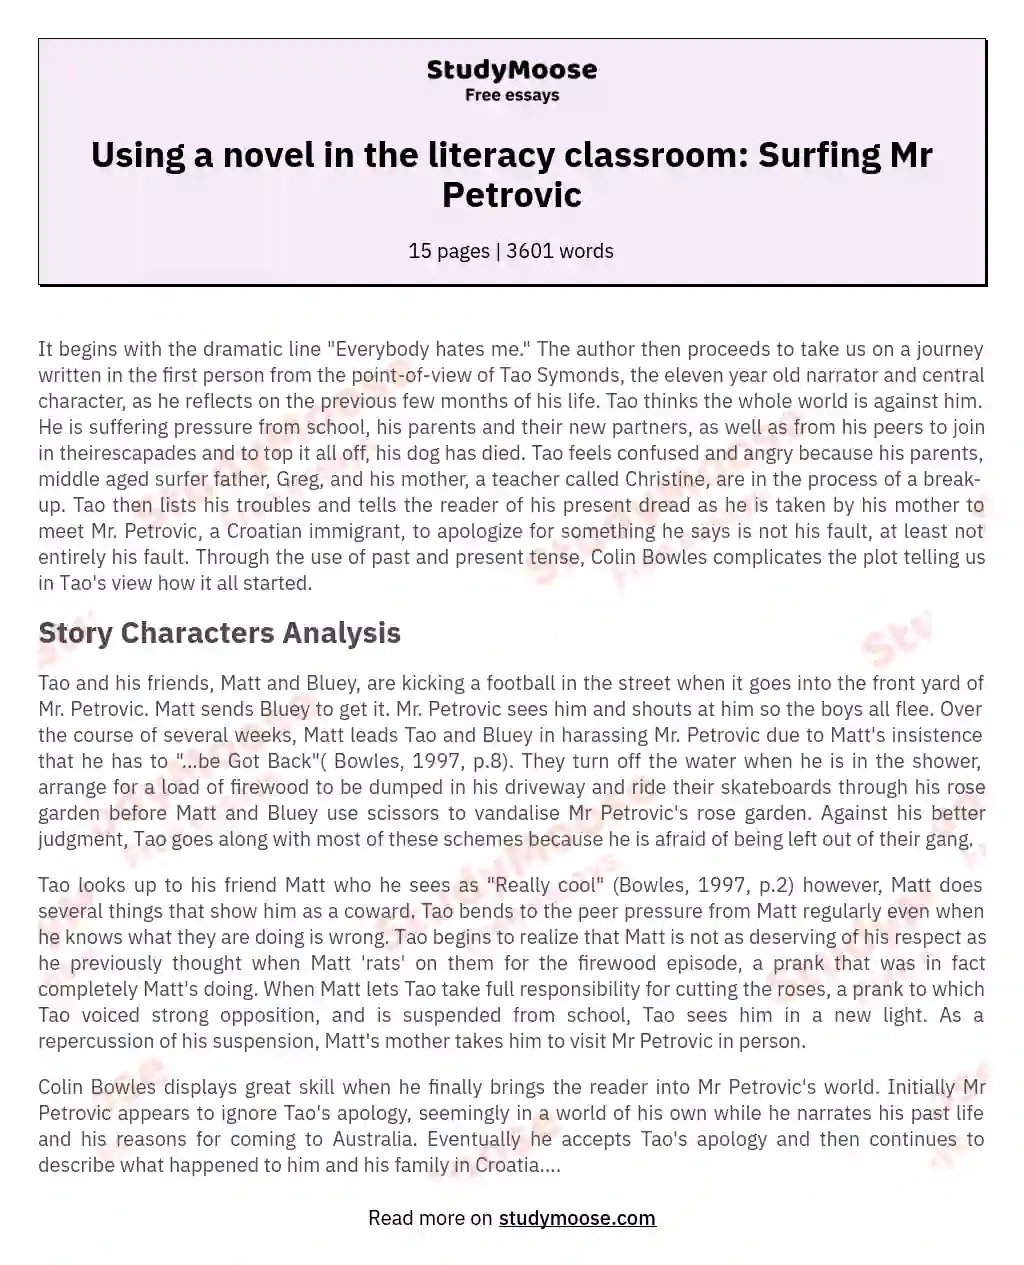 Using a novel in the literacy classroom: Surfing Mr Petrovic essay